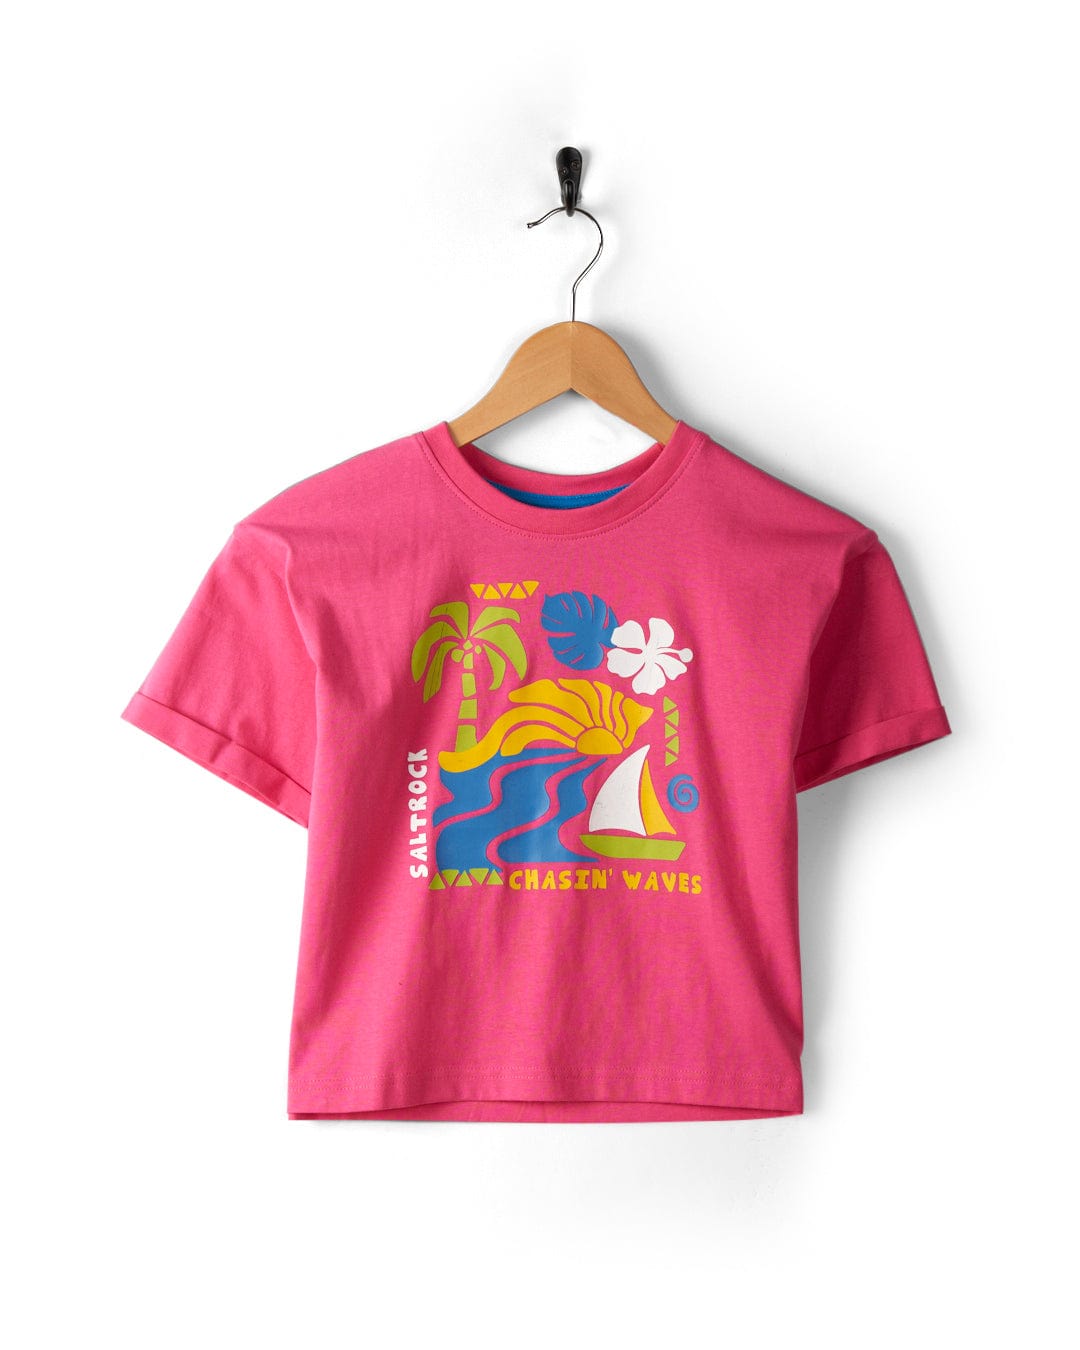 Summer Block - Kids Recycled Cropped T-Shirt - Pink with colorful Saltrock graphics, featuring a palm tree, sun, waves, and a sailboat. The text reads "Sunsick" and "Chasin' Waves." Made from recycled materials for an eco-friendly choice. The cropped boxy fit t-shirt is hanging on a wooden hanger.